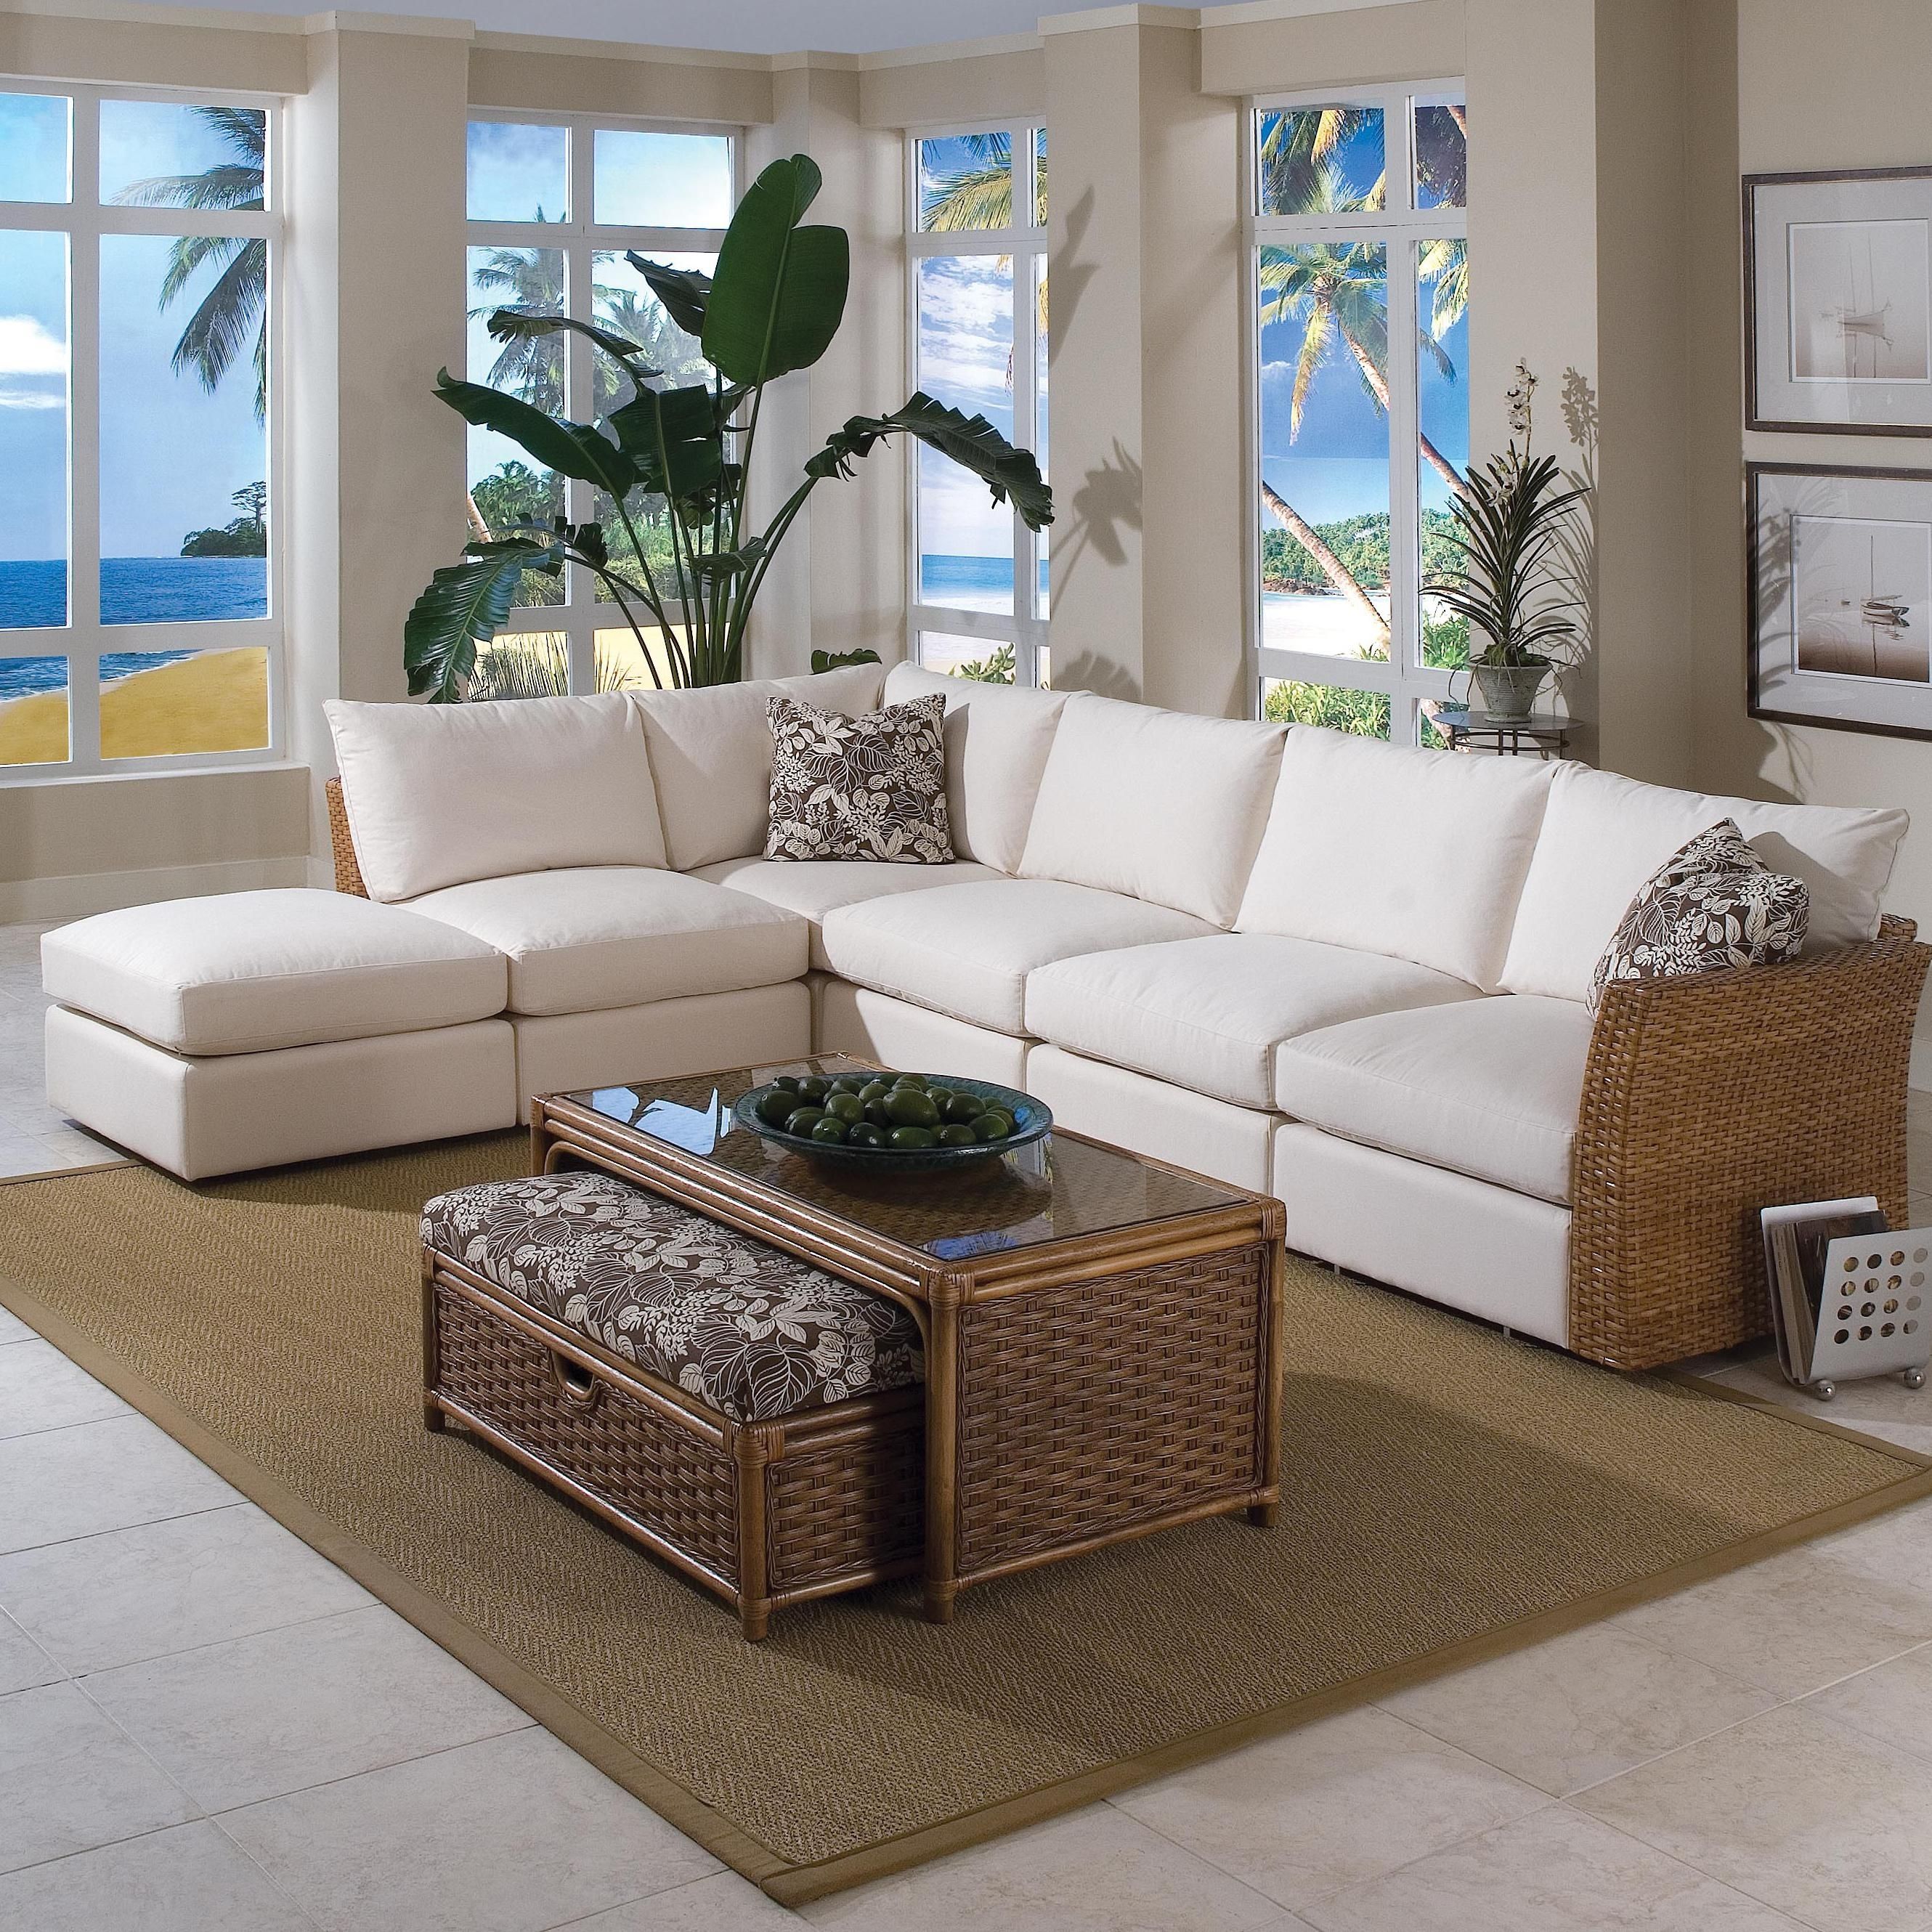 Braxton Culler Grand Water Point Tropical Sectional Sofa With Two With Greenville Sc Sectional Sofas (View 4 of 10)